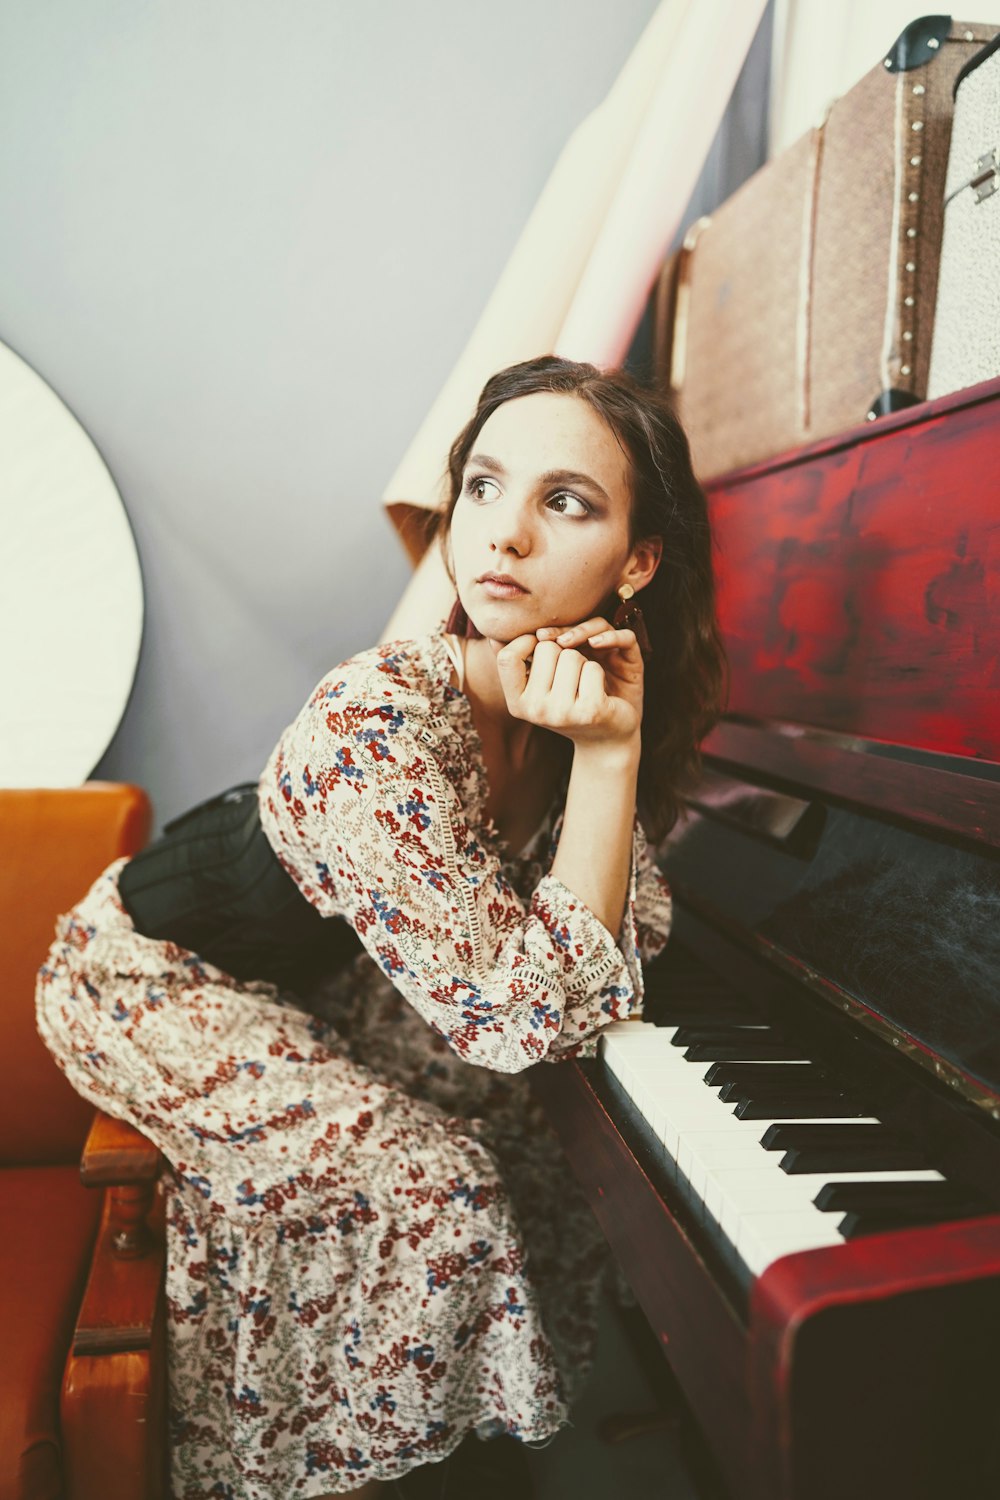 woman leaning on red and gray piano